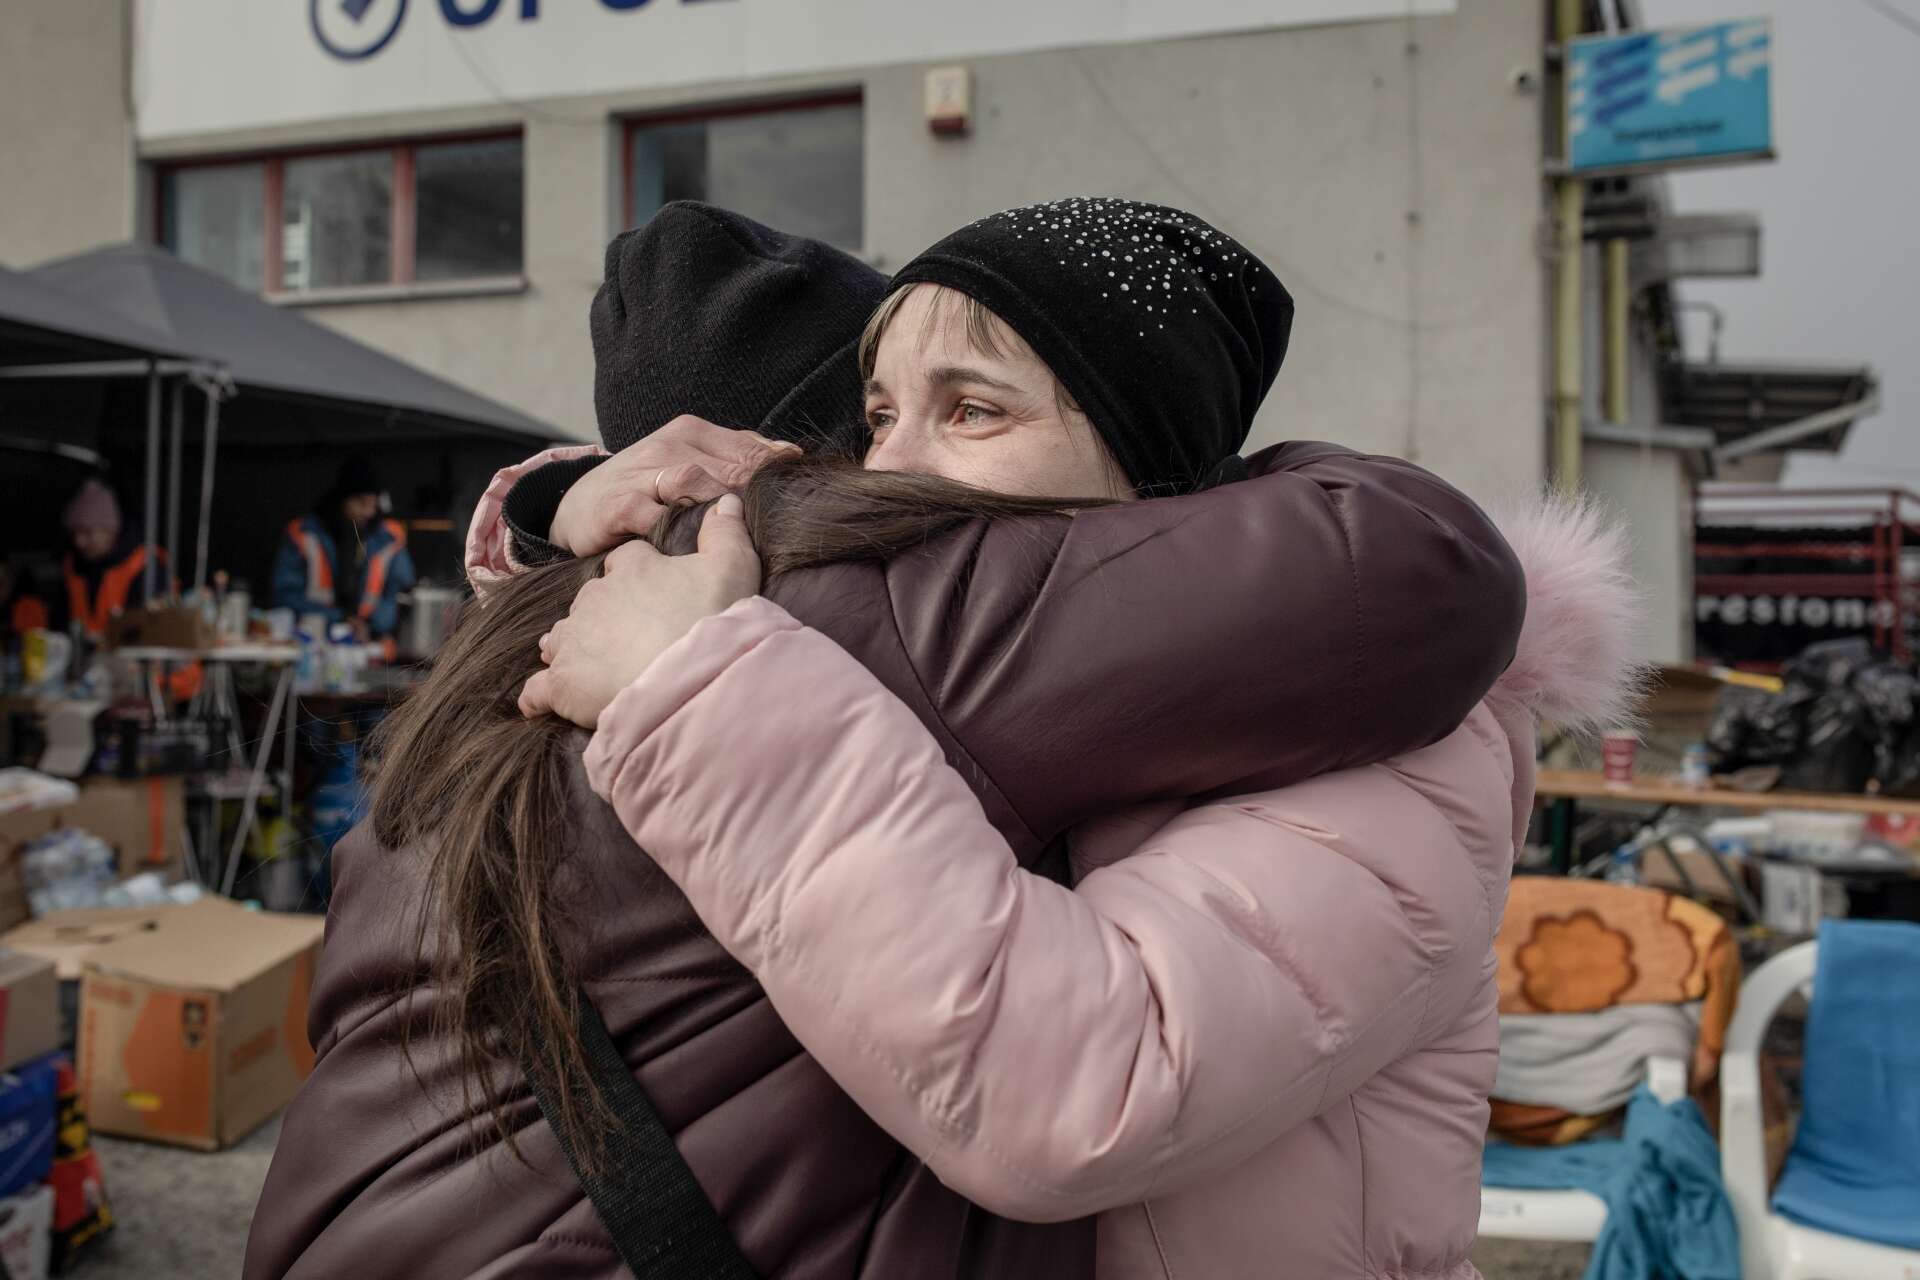 A mother and her adult daughter embrace in a tight hug at a border crossing near the Ukrainian - Polish border.